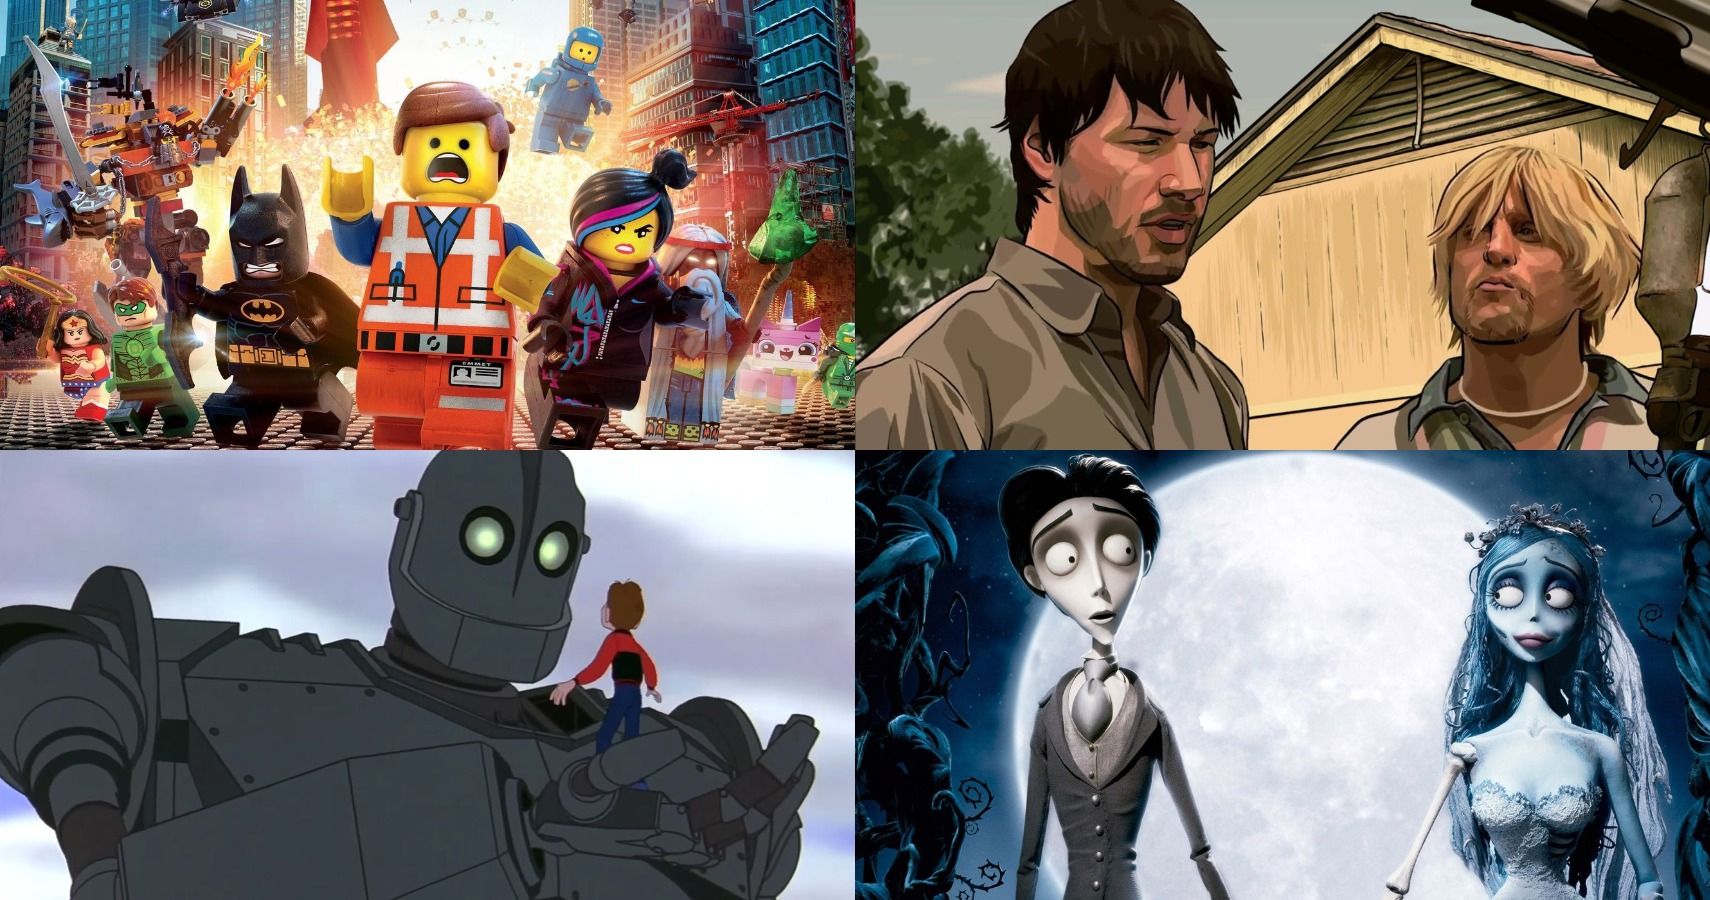 Warner Bros.: The 10 Best Animated Films Of All Time (According To IMDb)